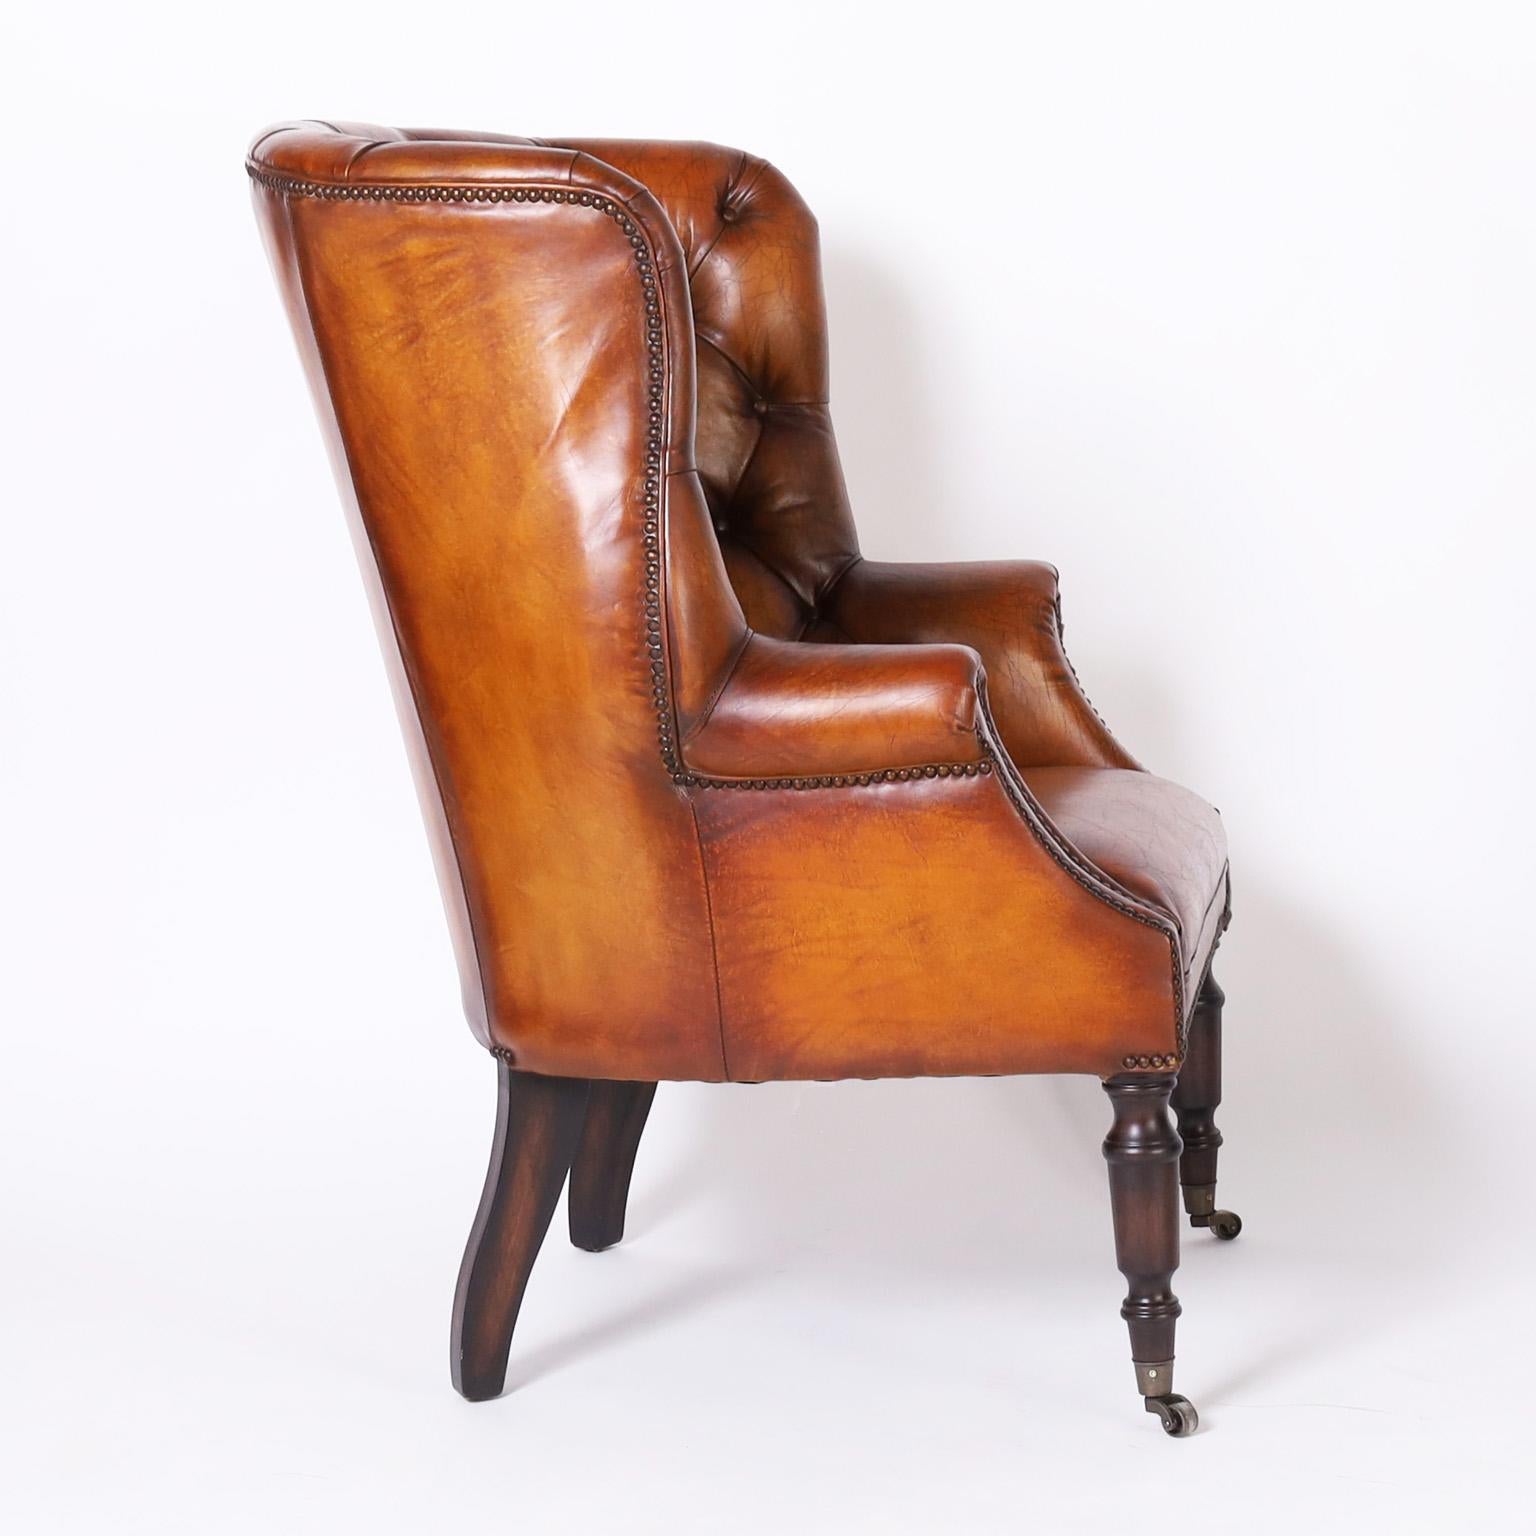 Hand-Crafted Pair of Leather Button Tufted Wingback British Colonial Style Armchairs For Sale